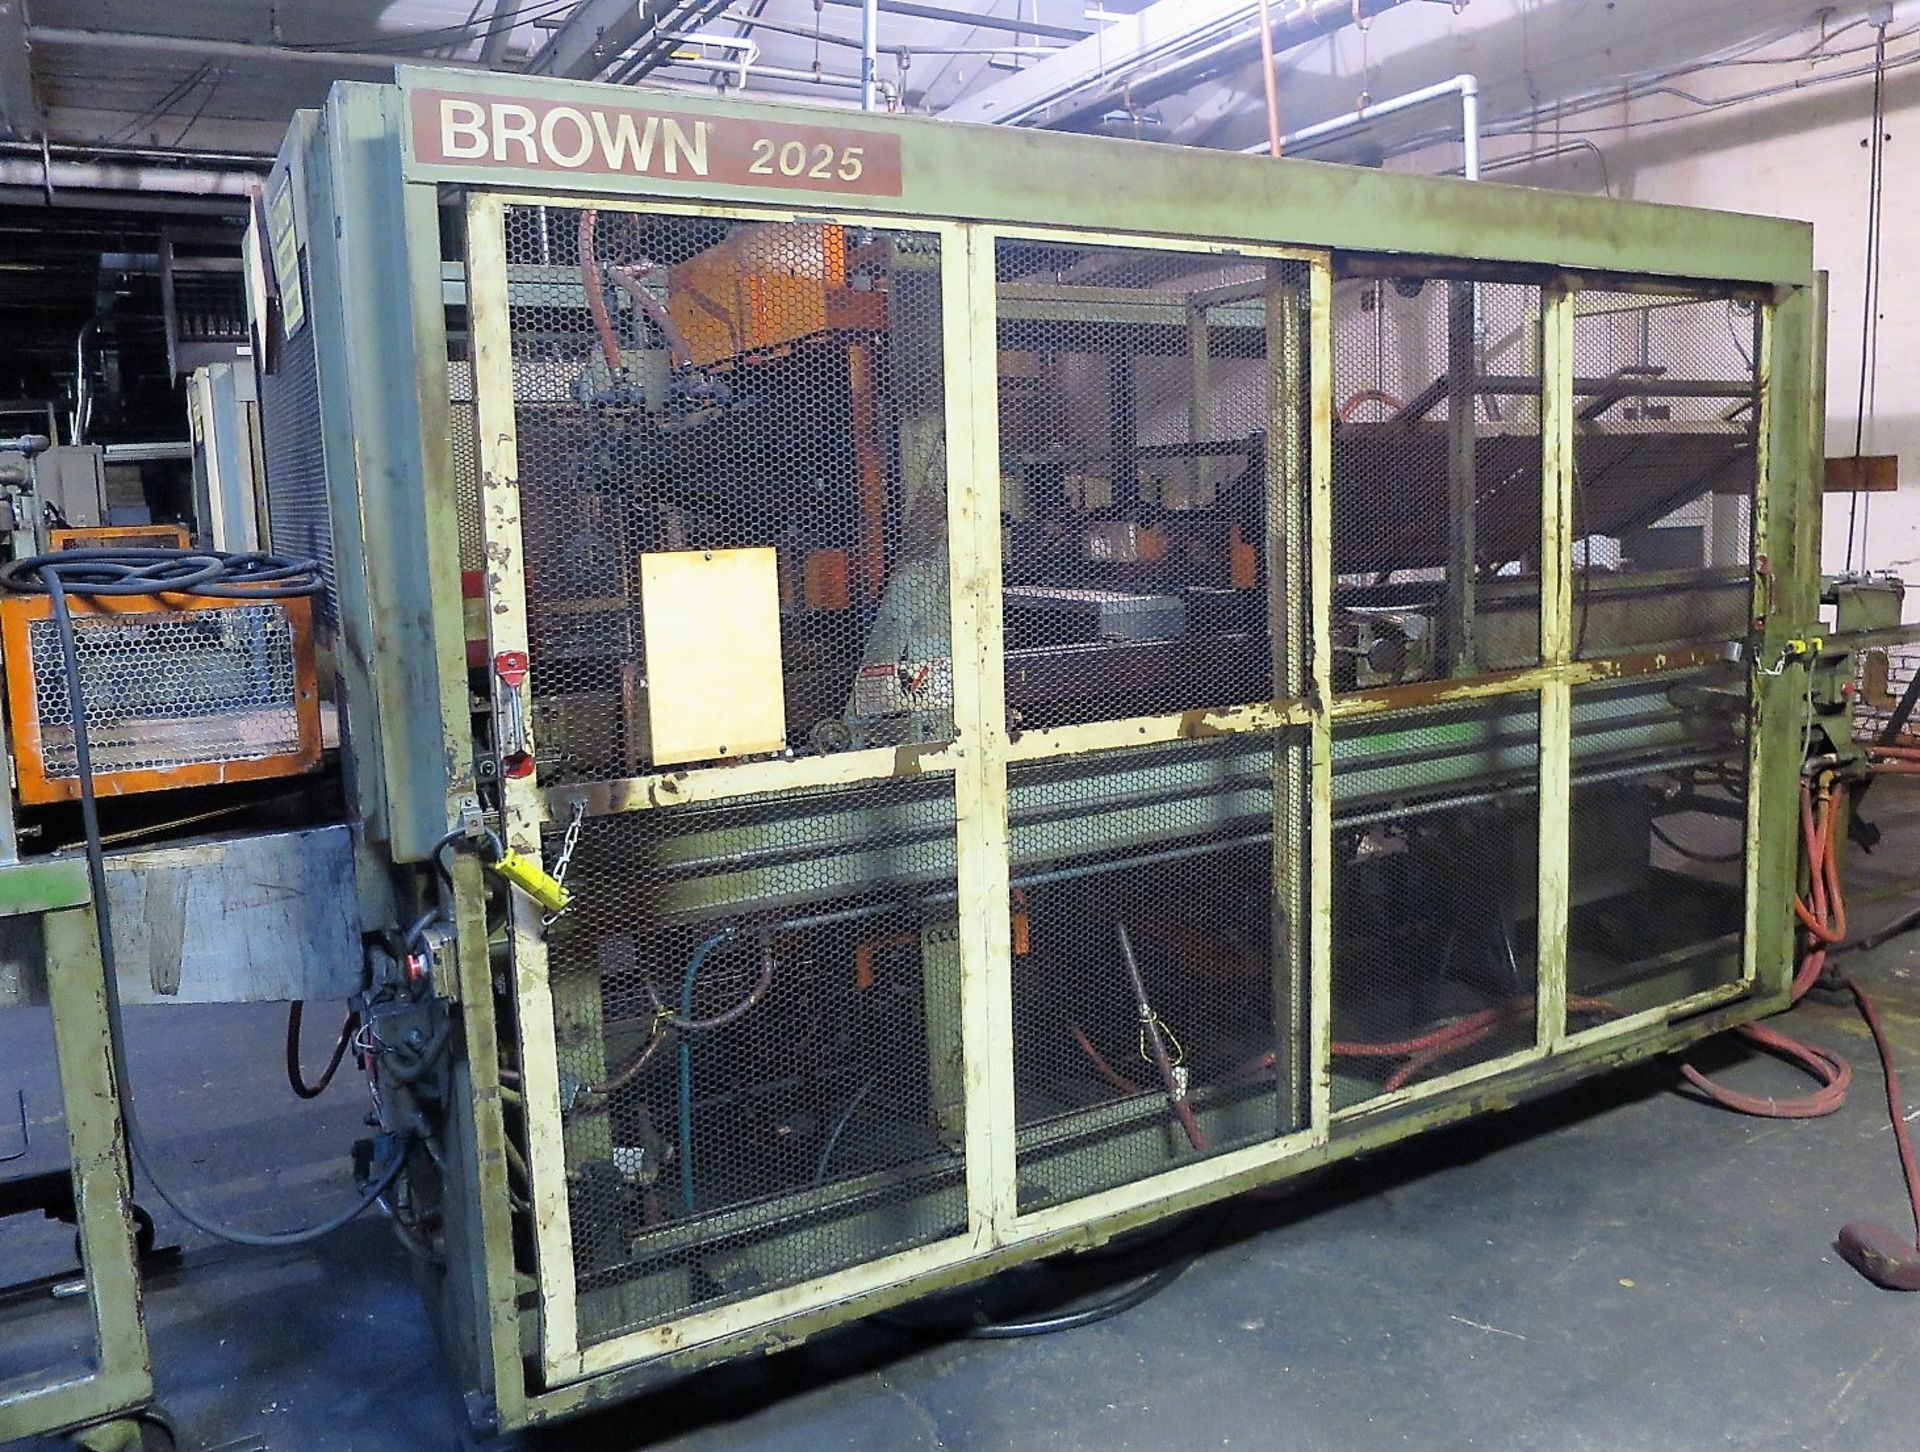 Brown 2025 Inline Thermoformer 20” x 25”, S/N 11103 - Image 4 of 10